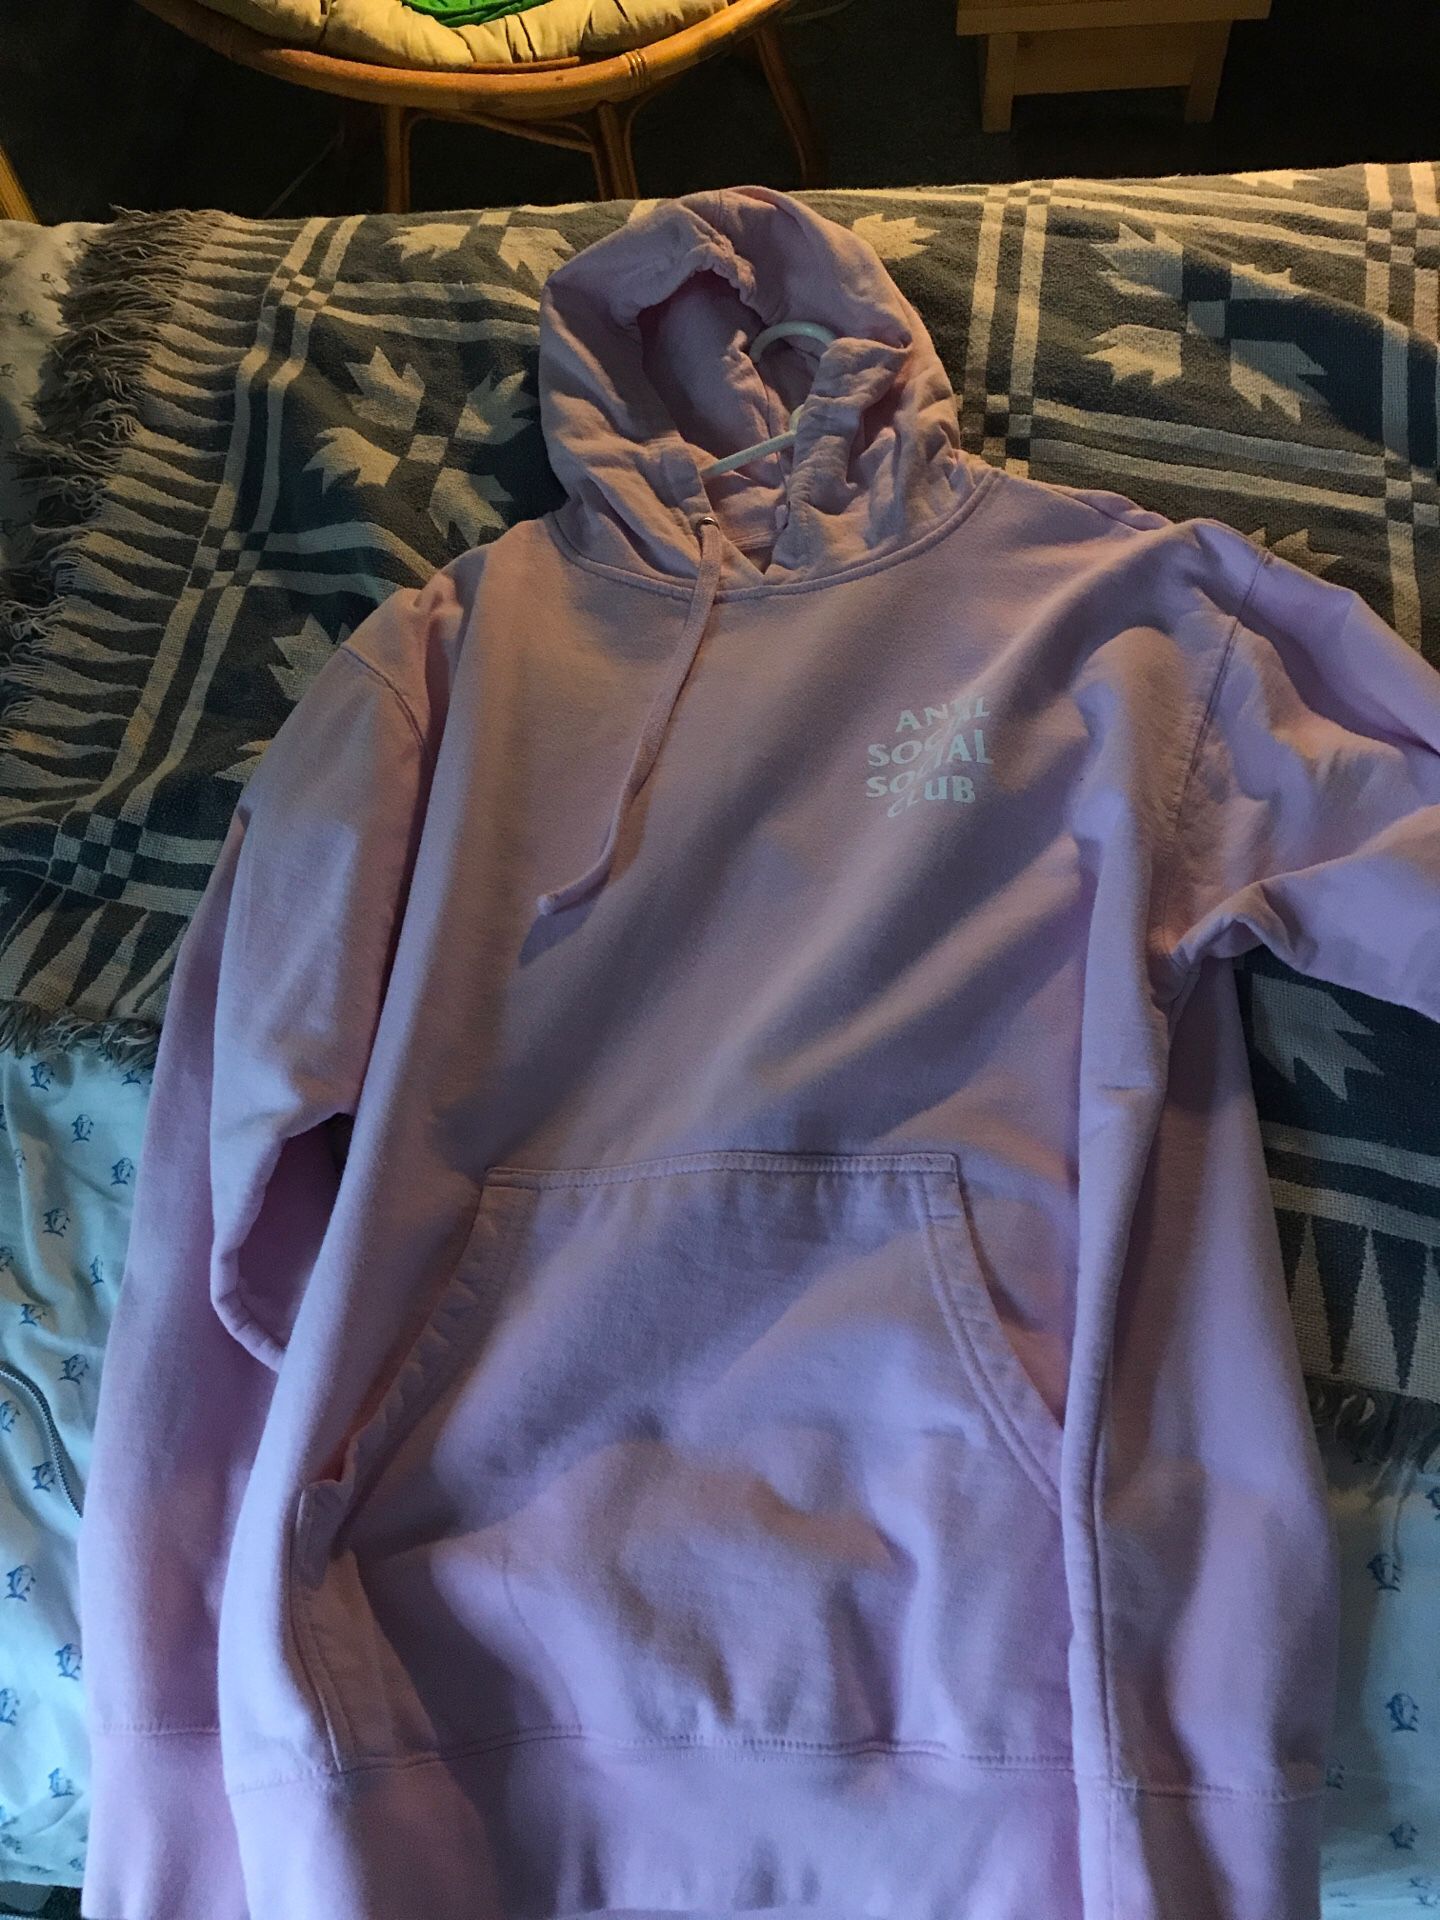 BRAND NEW 100 % authentic ASSC anti social social club hoodie pink size large